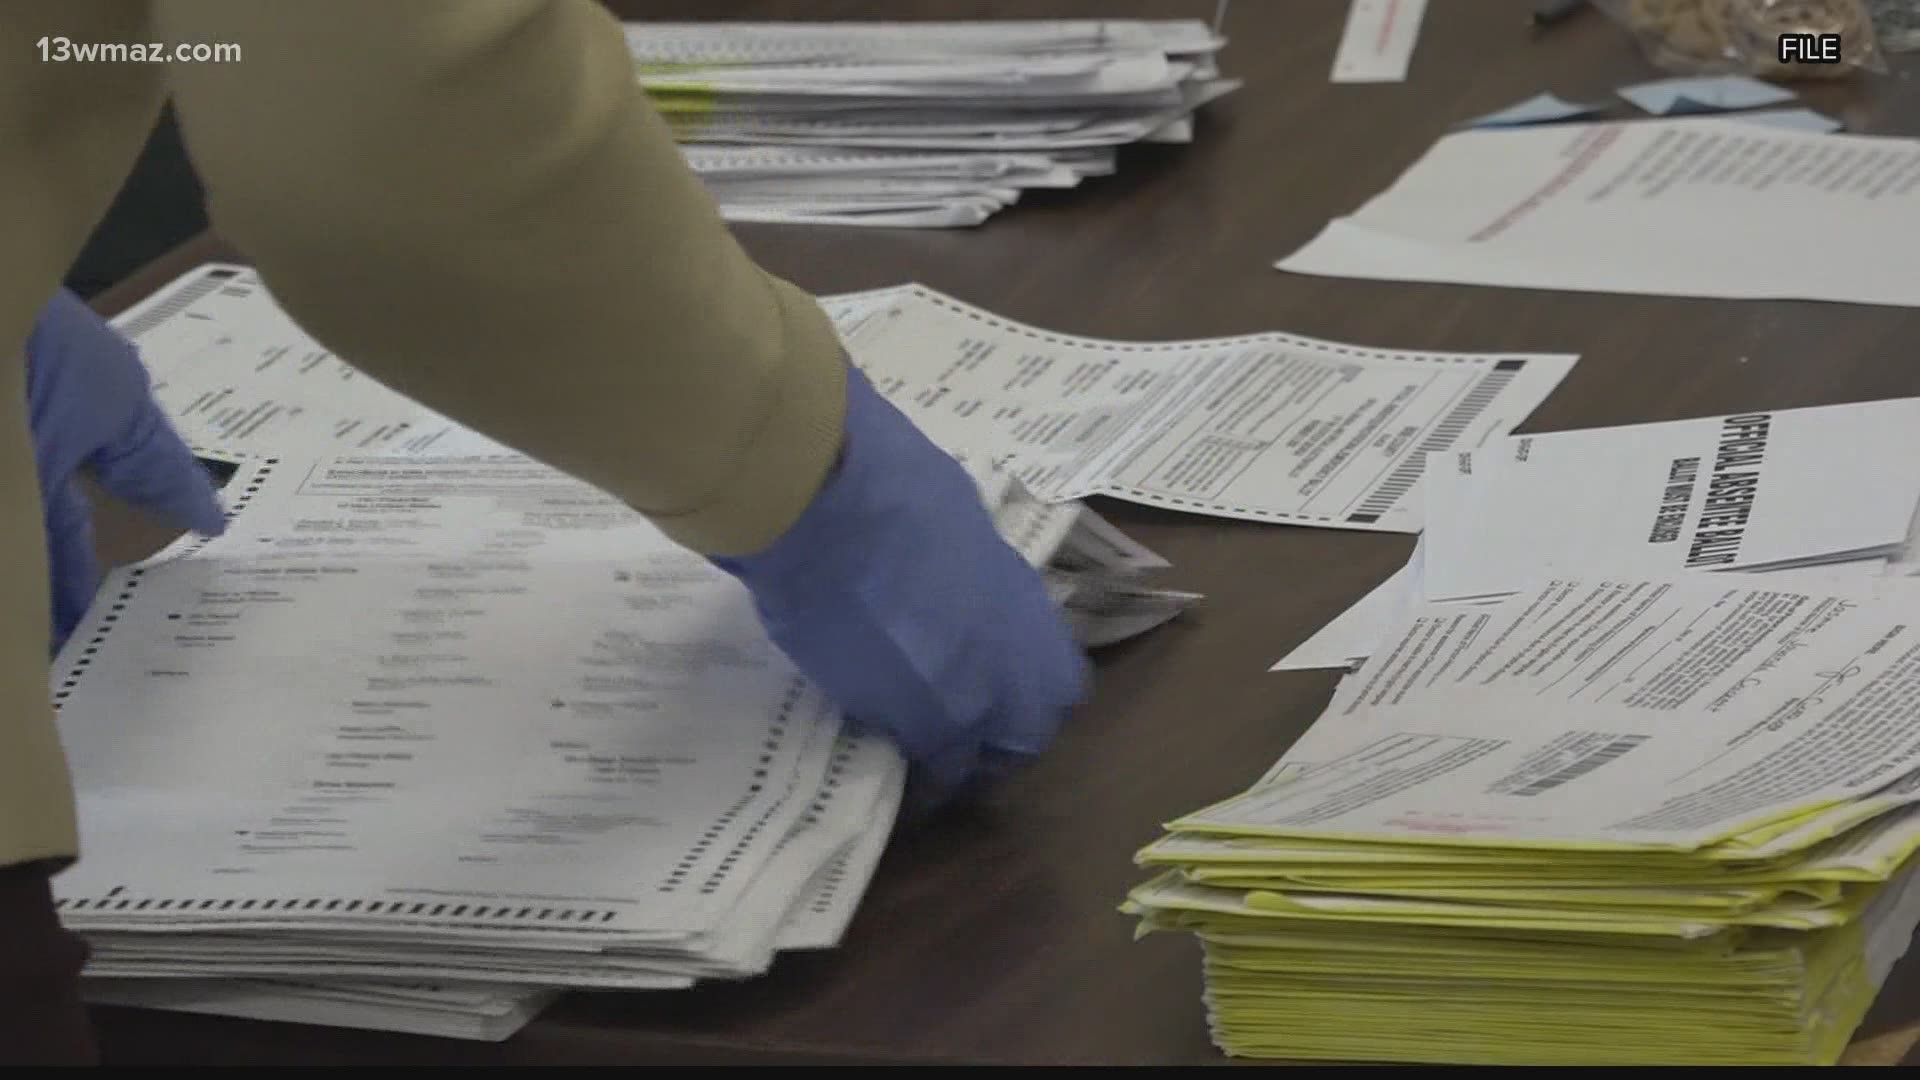 Houston County Board of Elections spent the day tallying up their final results. They've scanned all 20,000 of their absentee ballots and reviewing mistakes